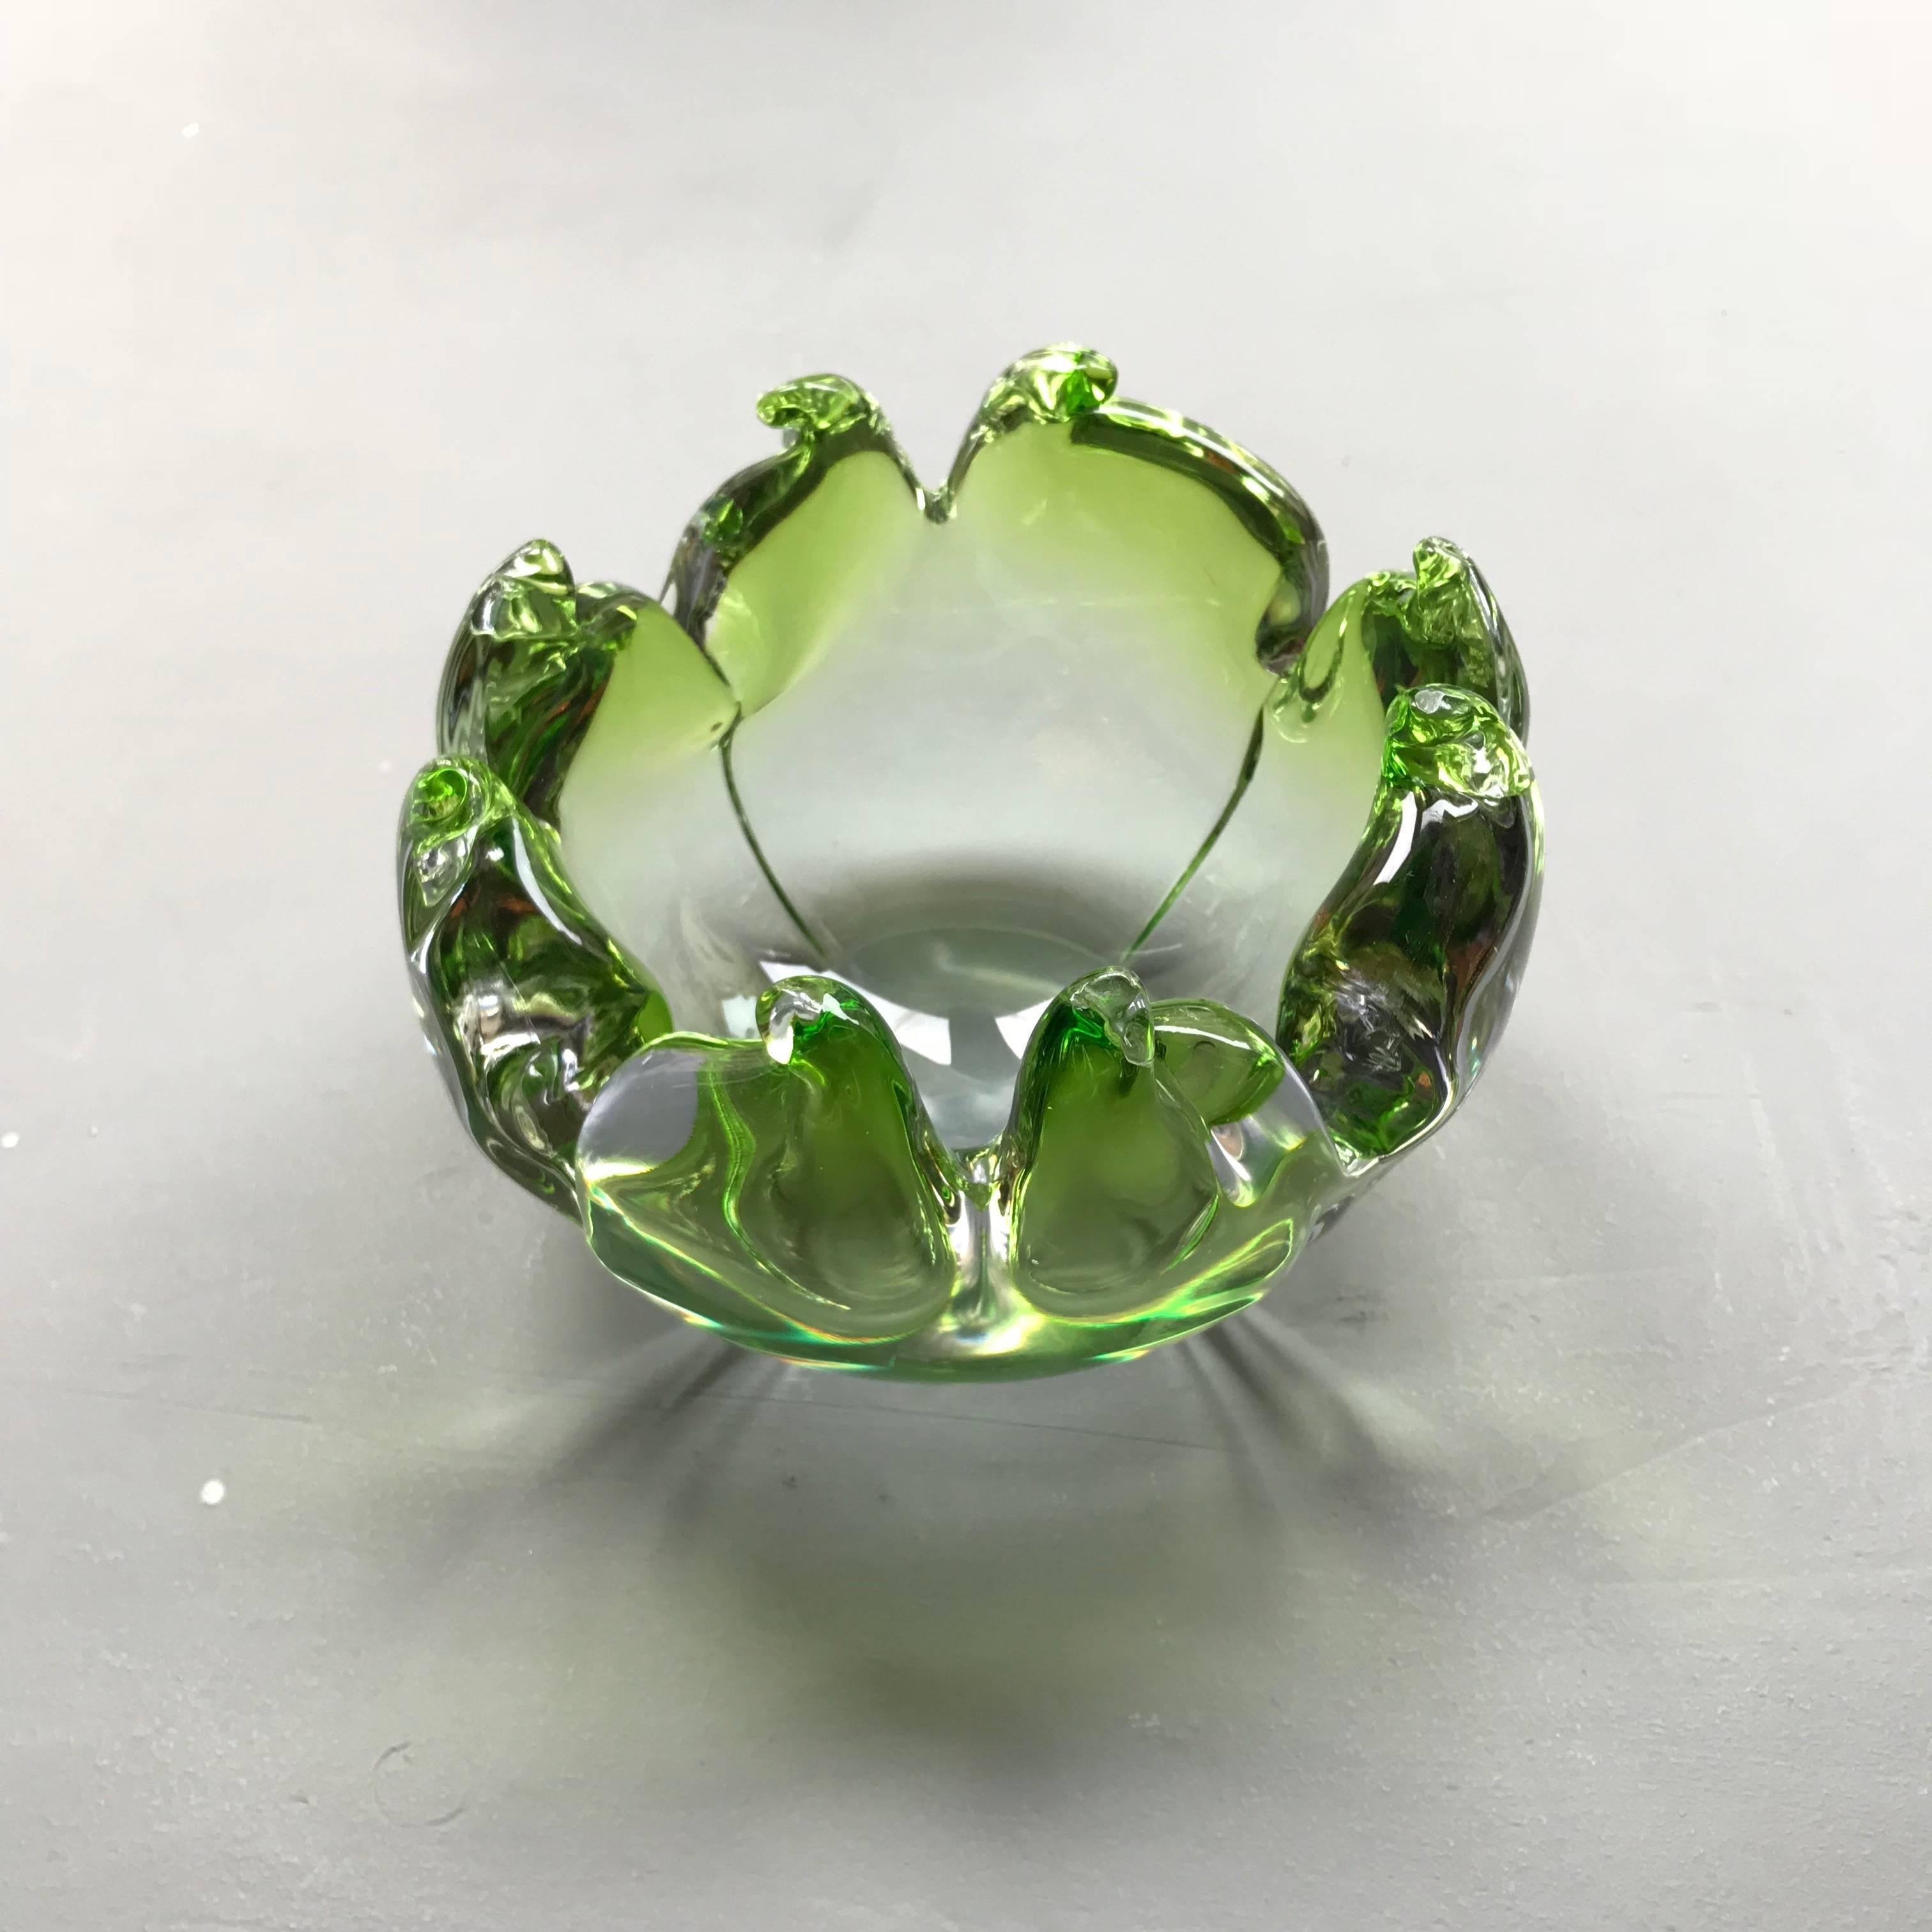 Unique lime green blown Murano glass bowl with twisted flame edges. The bowl was handblown of heavy thick-walled glass, with fire polished rims by Murano Art Glass in 1950s.

Measurements: Diameter 17 x H 10 cm. / D 6.7 x H 4.2 in.